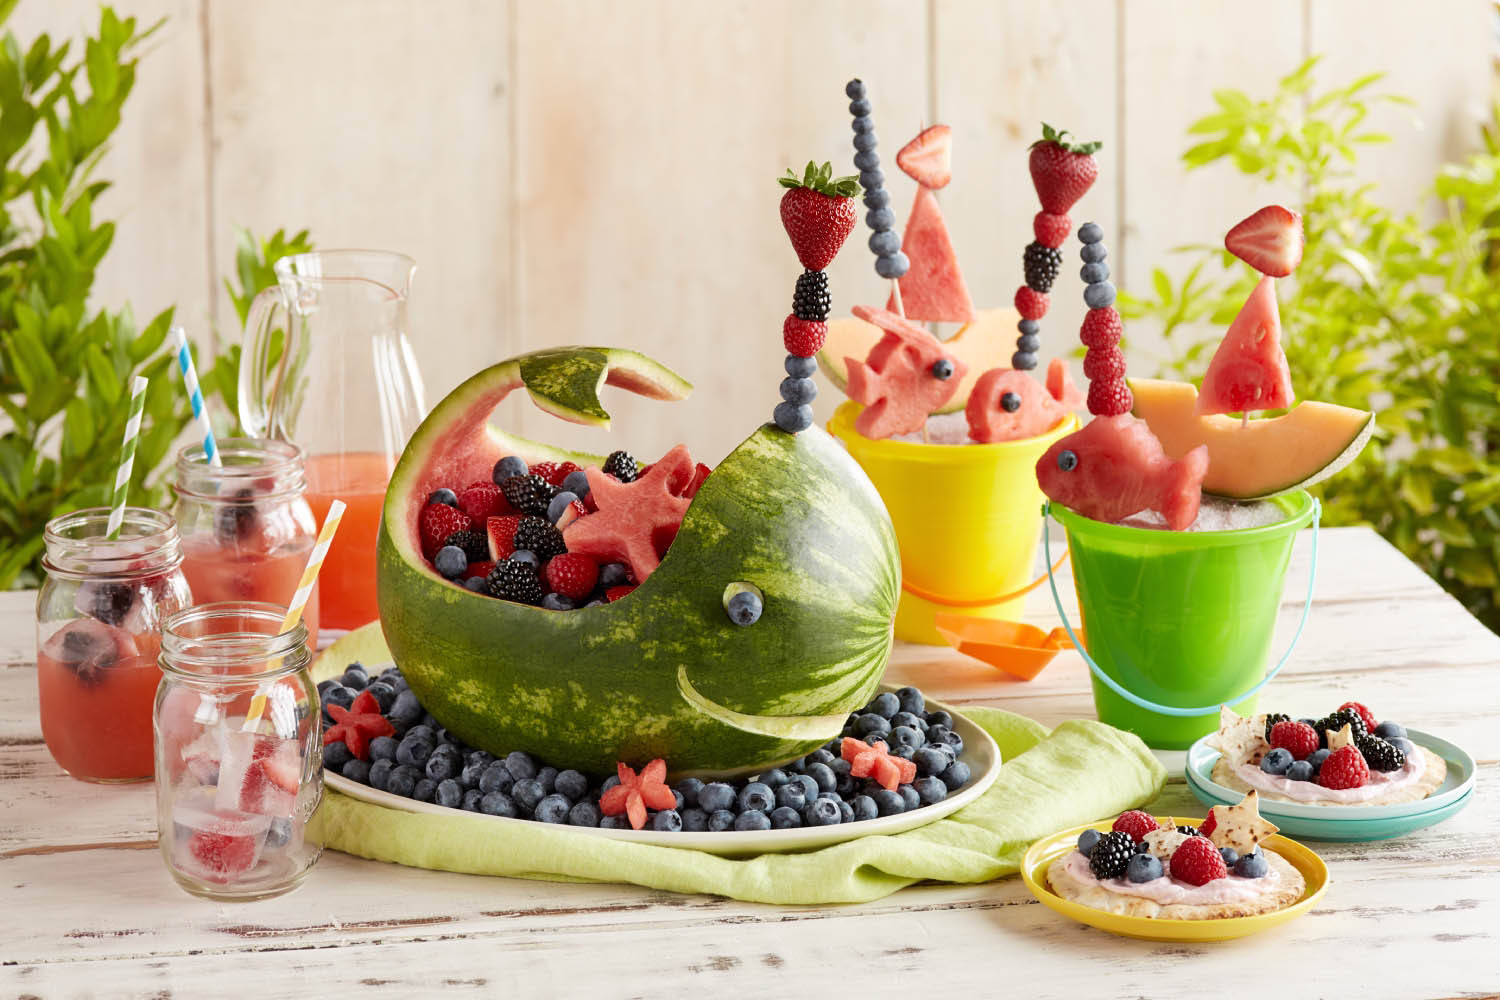 Food Ideas For A Winter Beach Party
 Splash into Summer with a Berry Beach Party